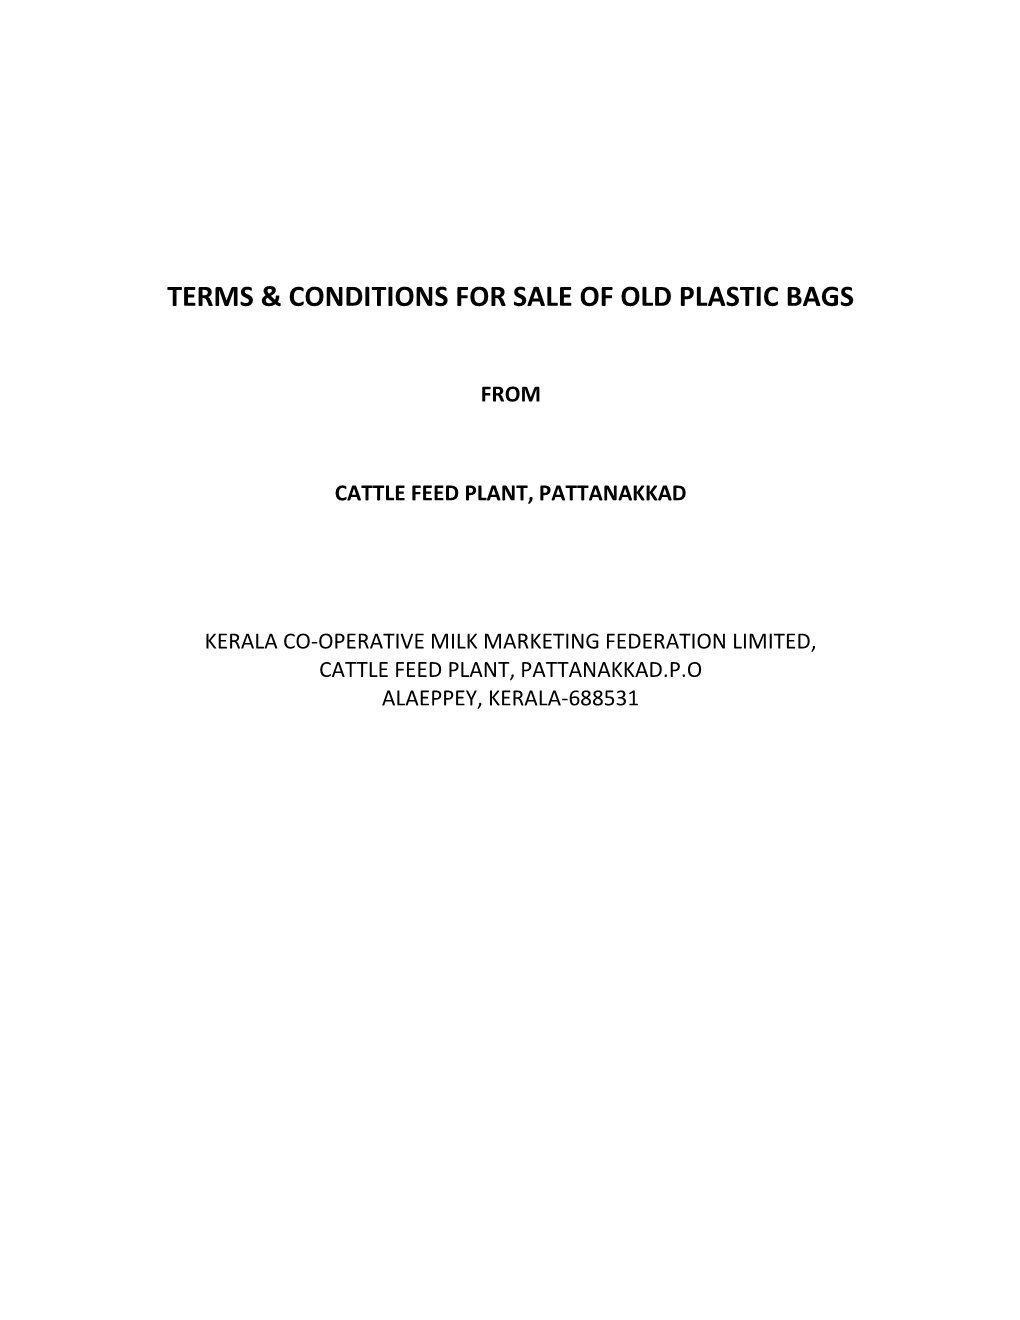 Terms & Conditions for Sale of Old Plastic Bags